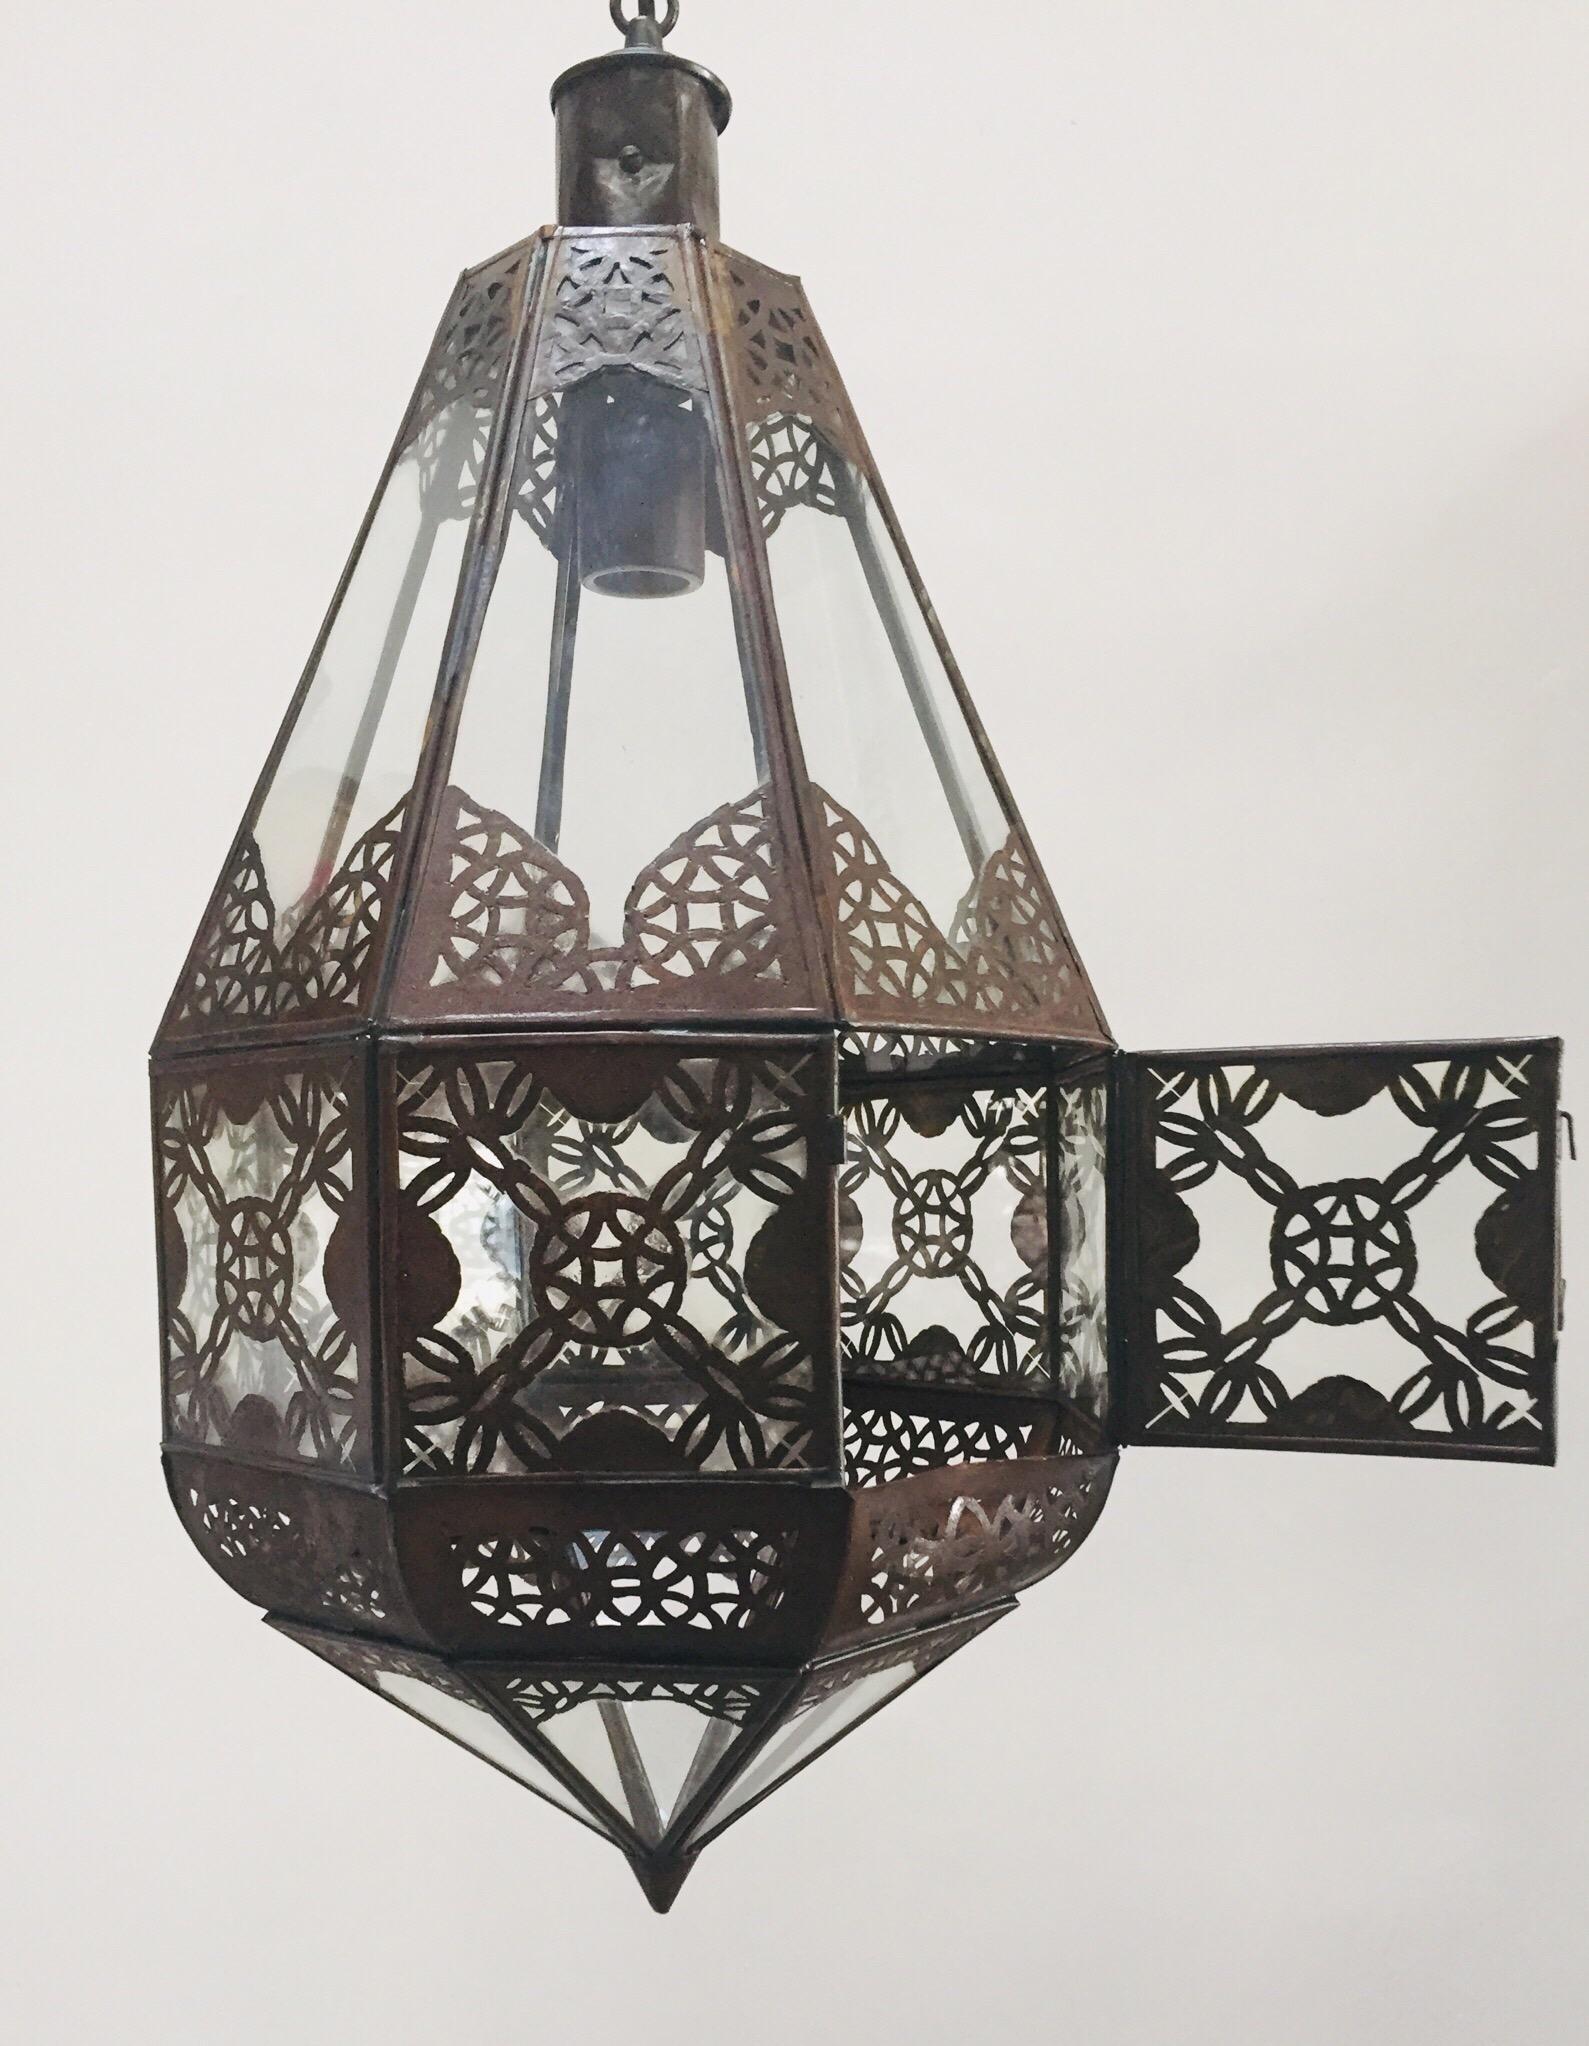 Stylish handcrafted Moroccan lantern in clear glass.
Antique bronze rust finish metal with Moorish filigree openwork design.
This Moroccan light fixture is rewired for one light bulb, 3 ft chains and ceiling canopy.
Moroccan lantern handmade by